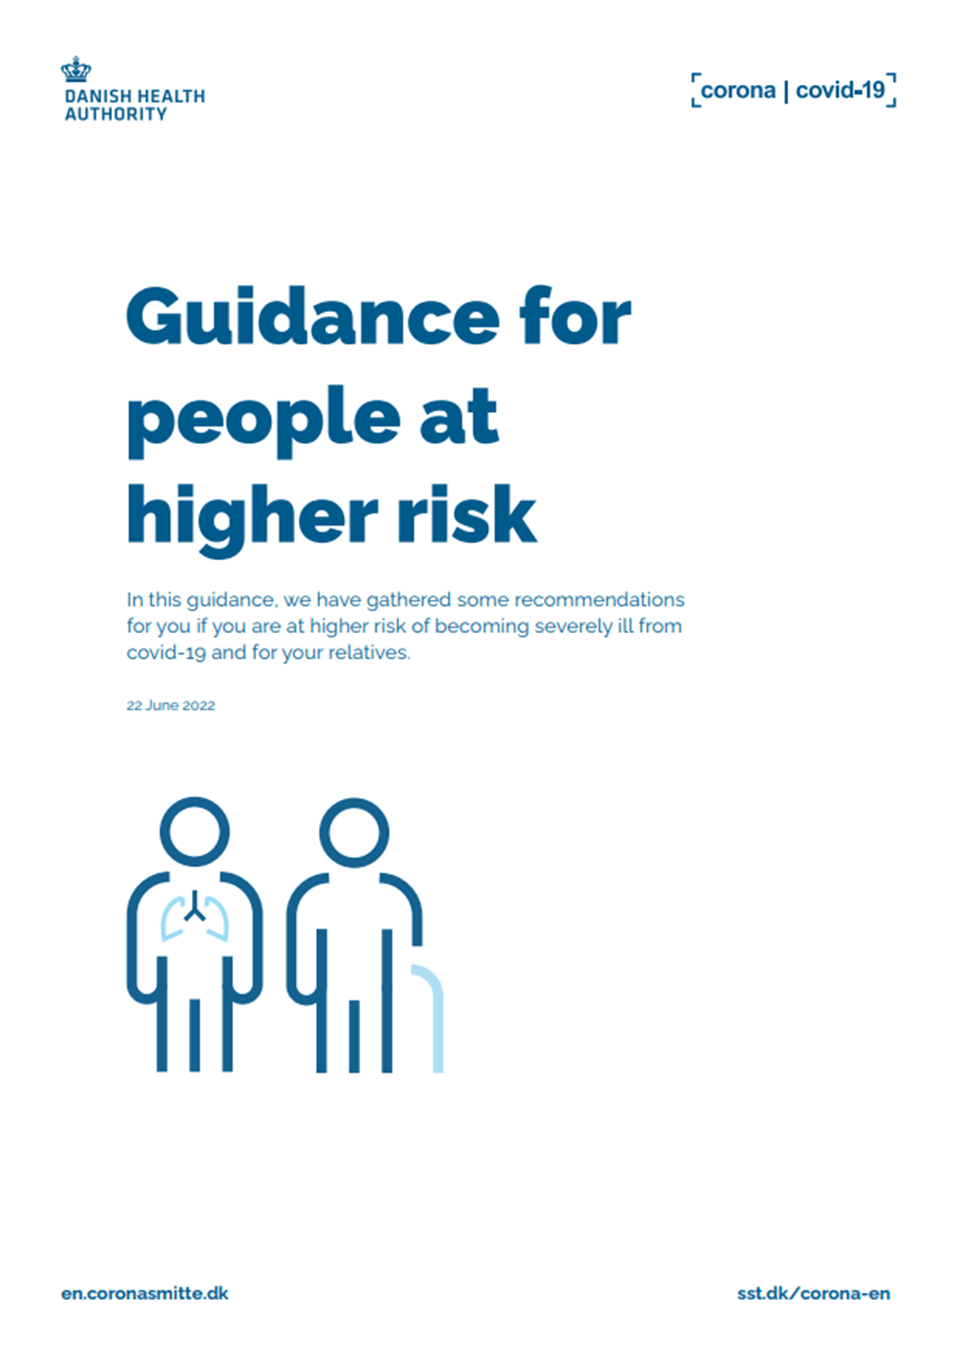 Guidance for people at higher risk